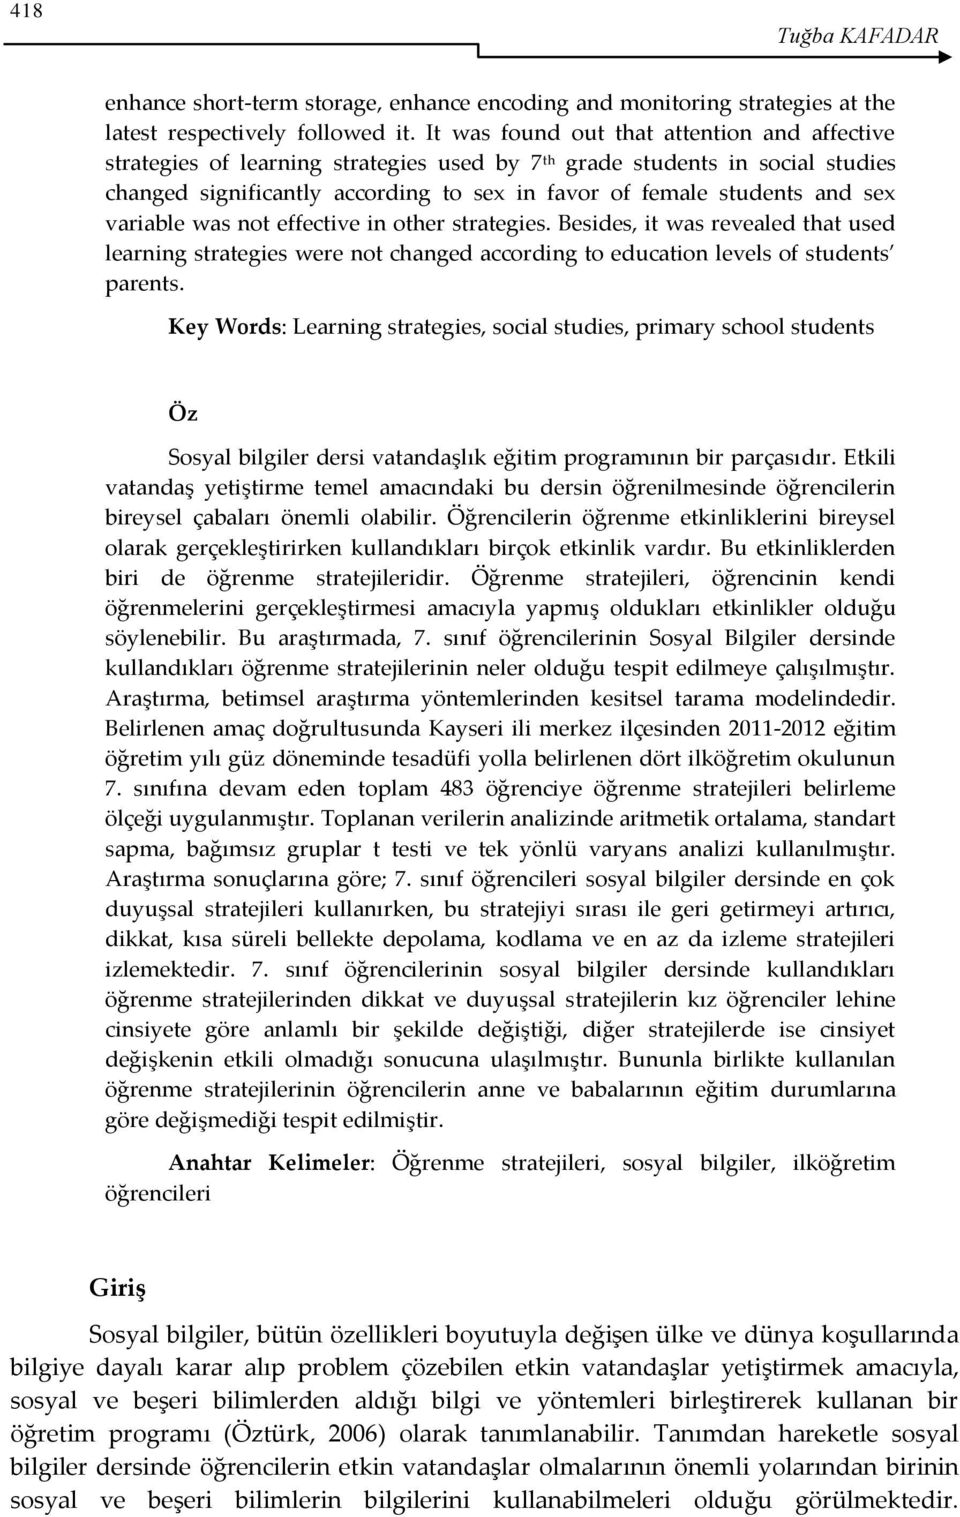 sex variable was not effective in other strategies. Besides, it was revealed that used learning strategies were not changed according to education levels of students parents.